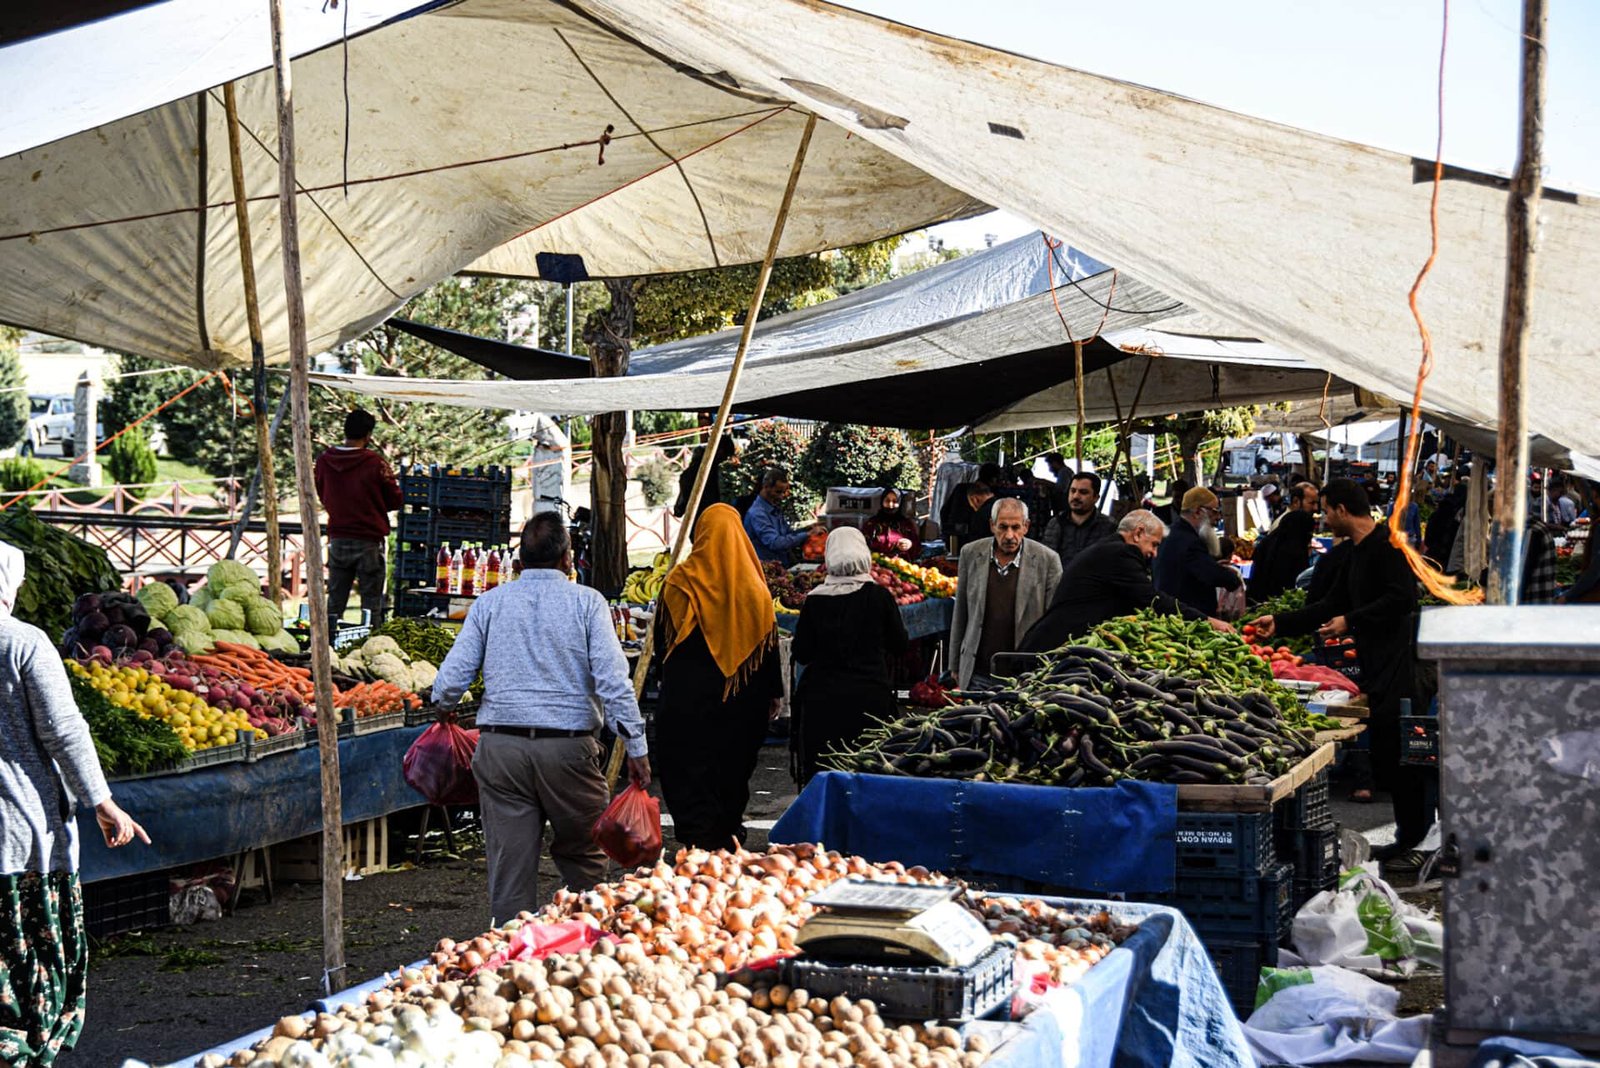 people walk through a fruit and vegetable bazaar covered by awnings